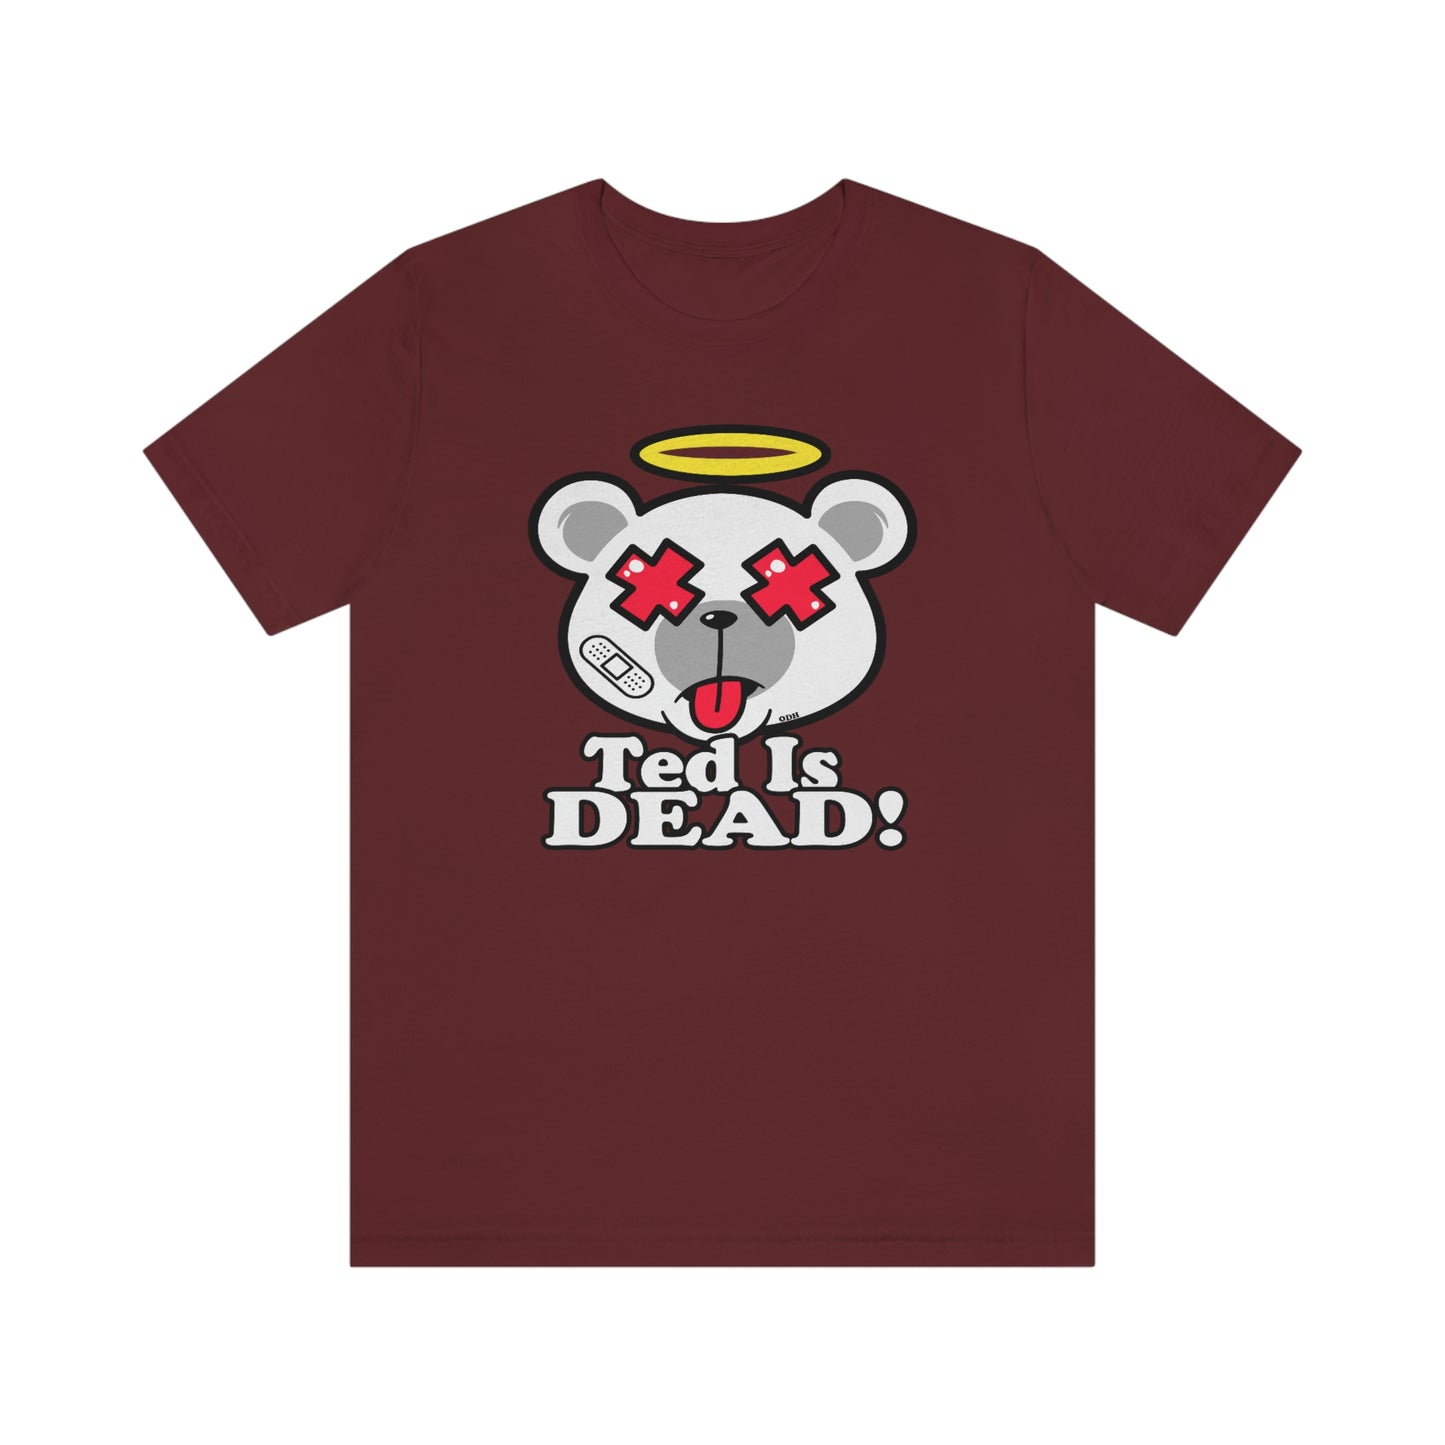 Ted Is Dead!™ Original Collection by ODH